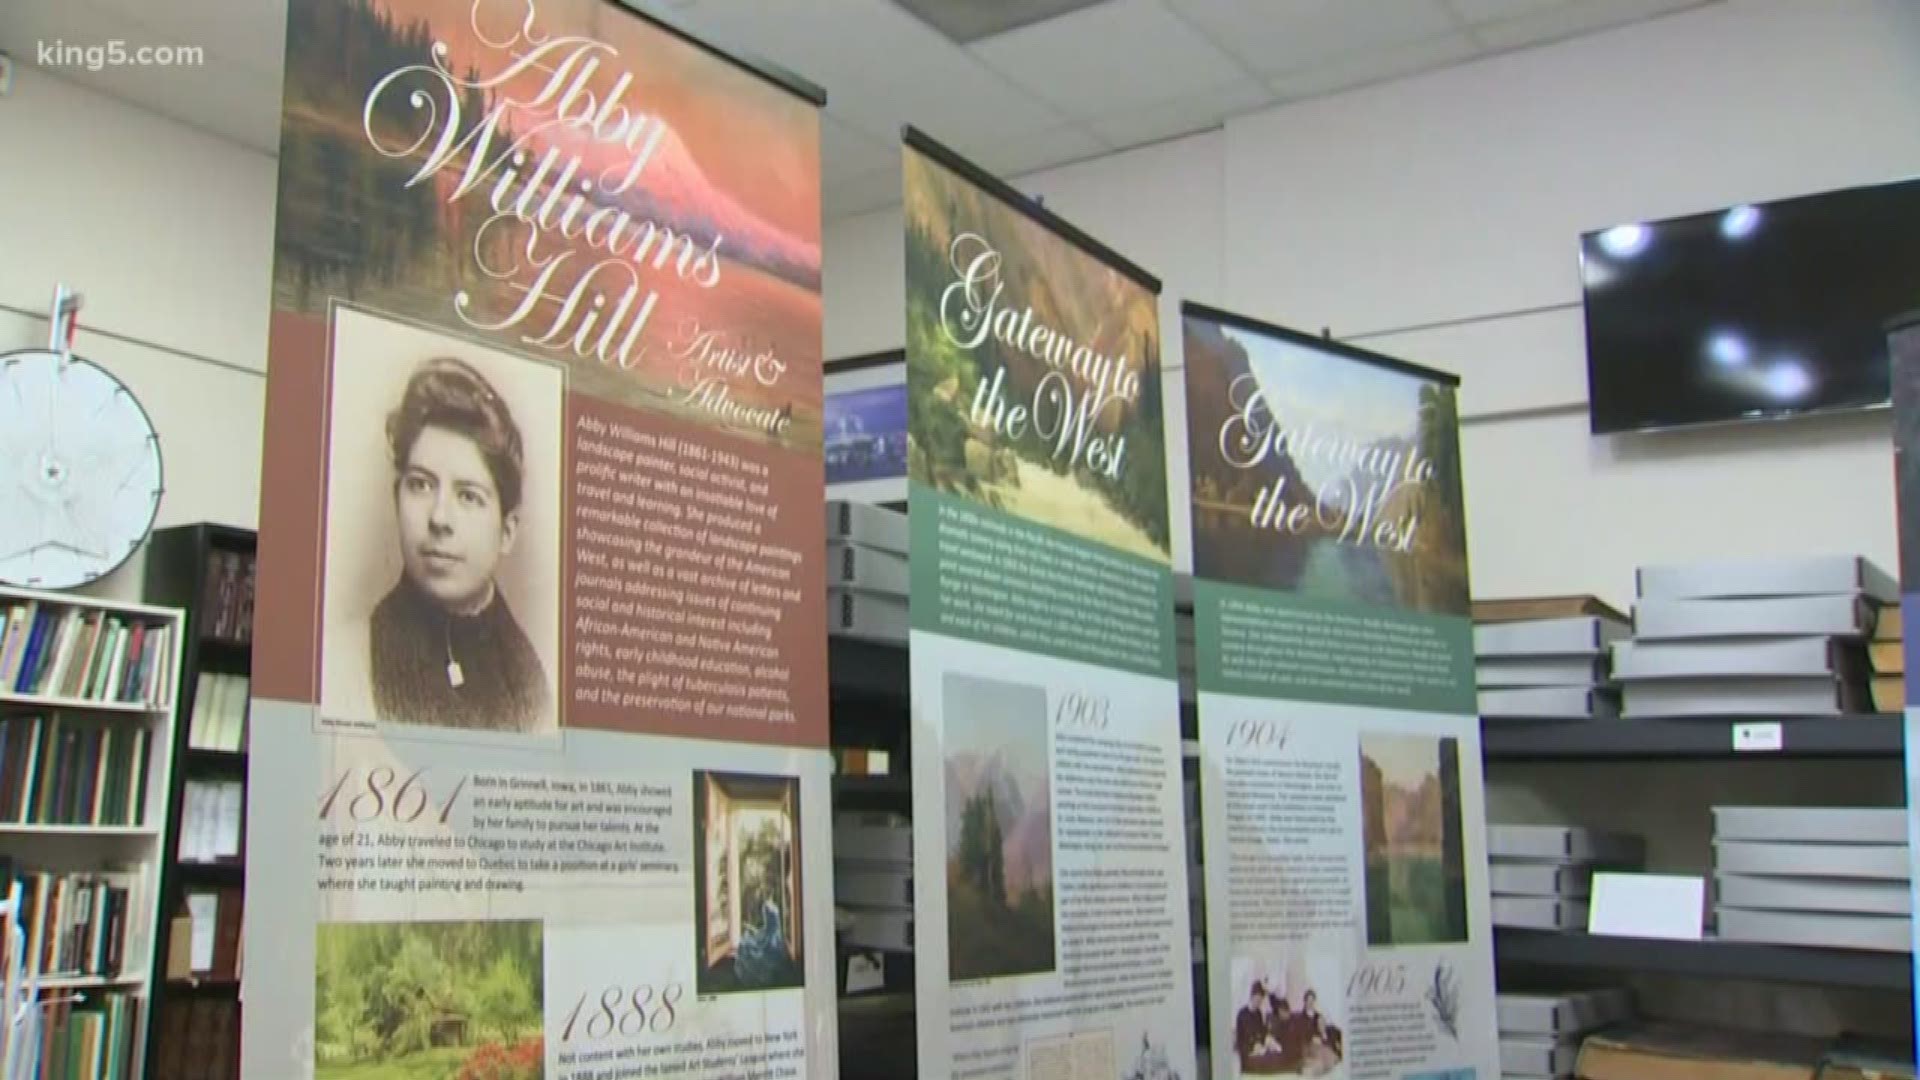 In honor of Women's History Month, the Tacoma Historical Society is showcasing the stories of 21 women who made a name for themselves. KING 5’s Jenna Hanchard reports.